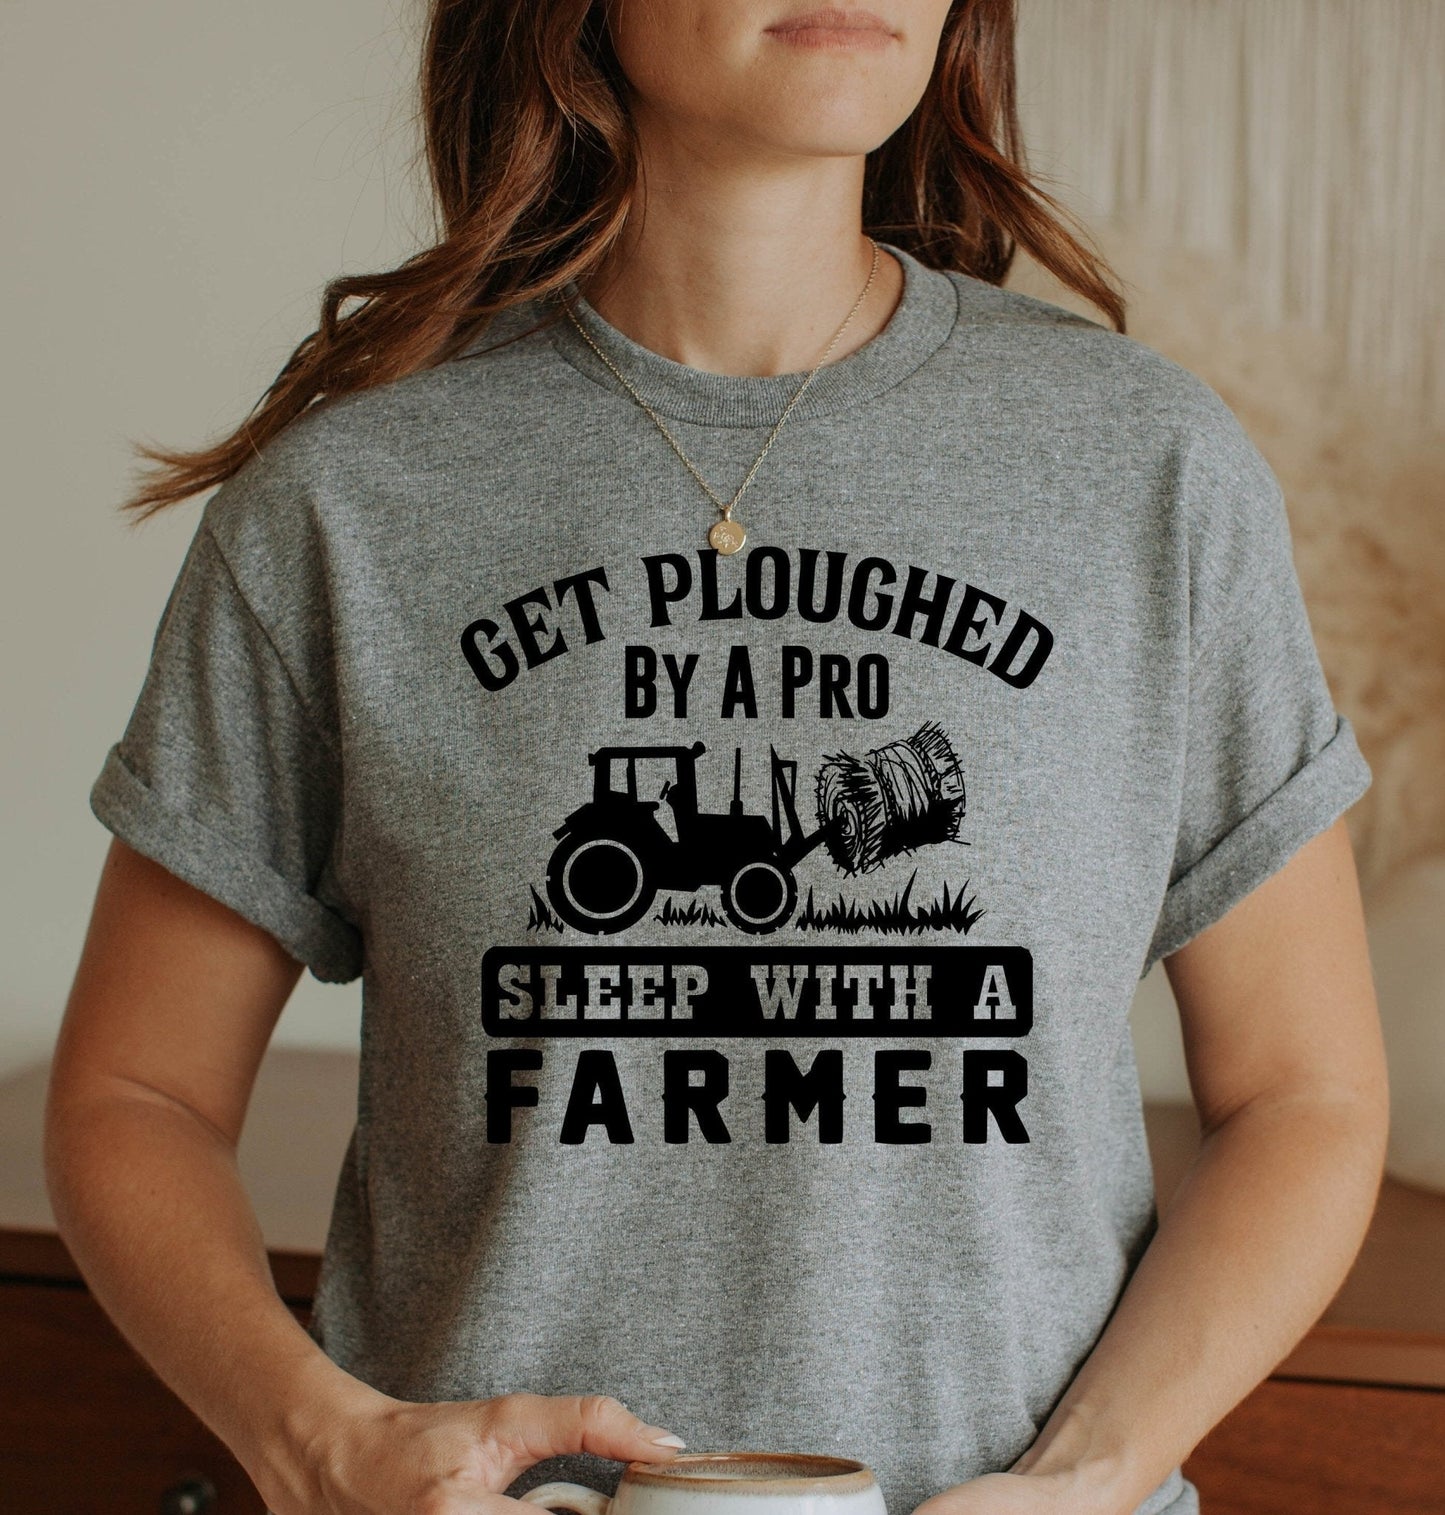 Get Ploughed by a Pro - Sleep With a Farmer Download | Cryin Creek